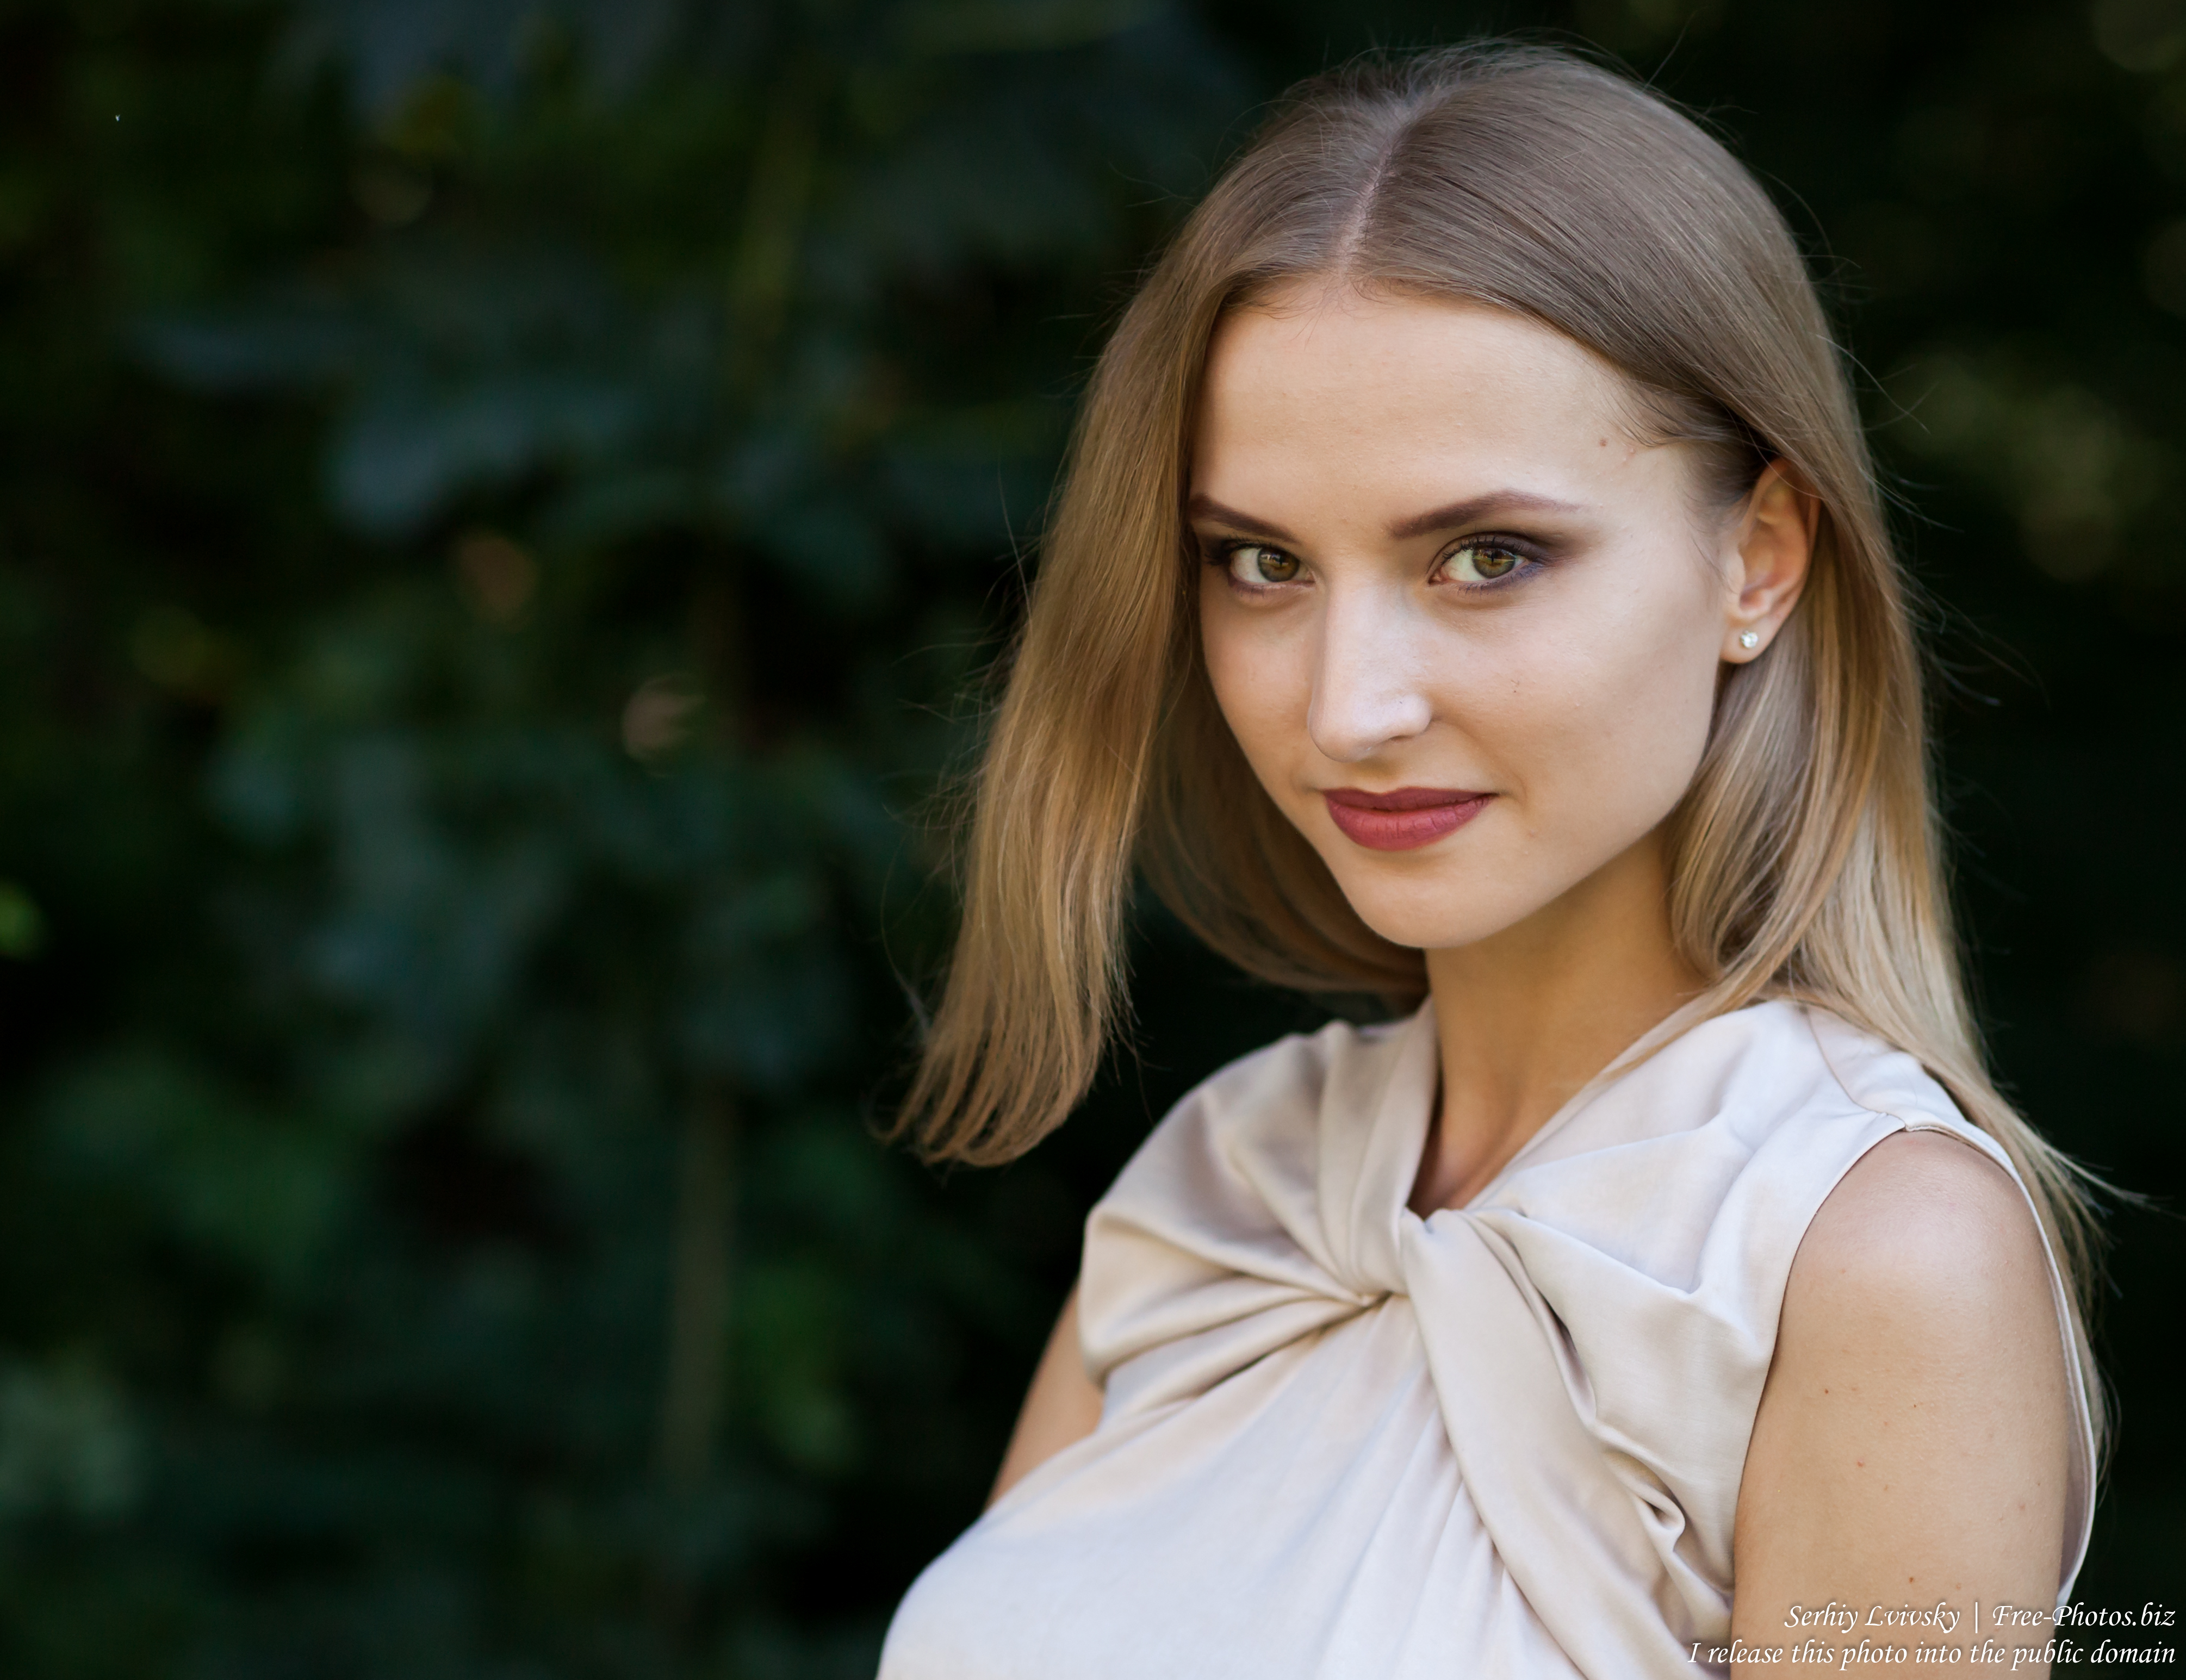 Marta - a 21-year-old natural blonde Catholic girl photographed by Serhiy Lvivsky in August 2017, picture 35